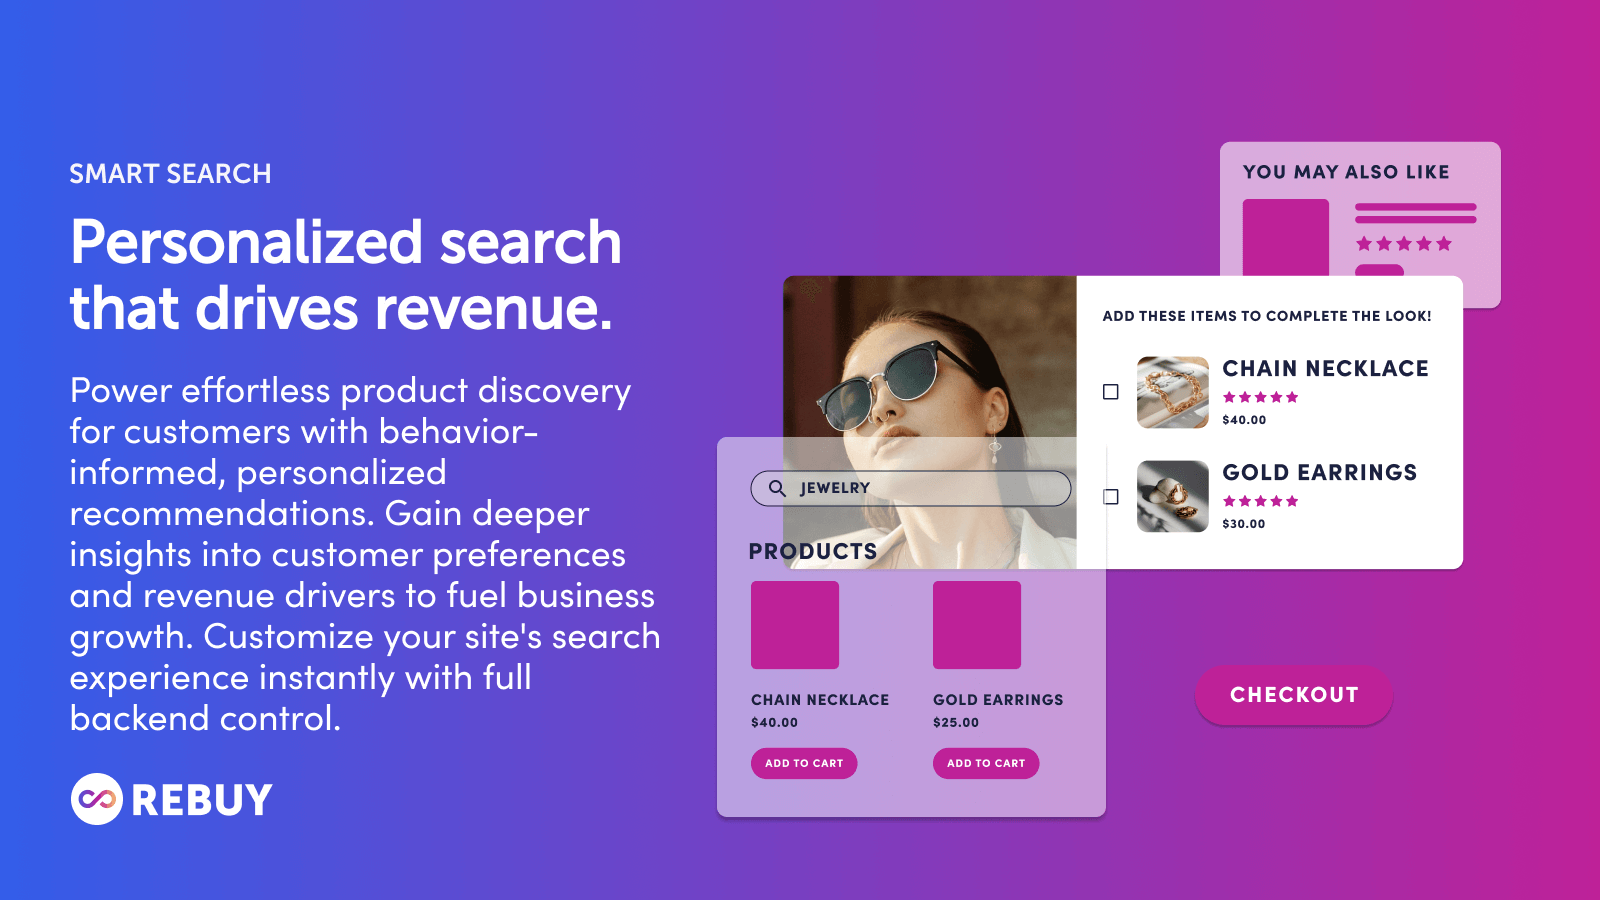 Personalized search & product discovery that drives revenue